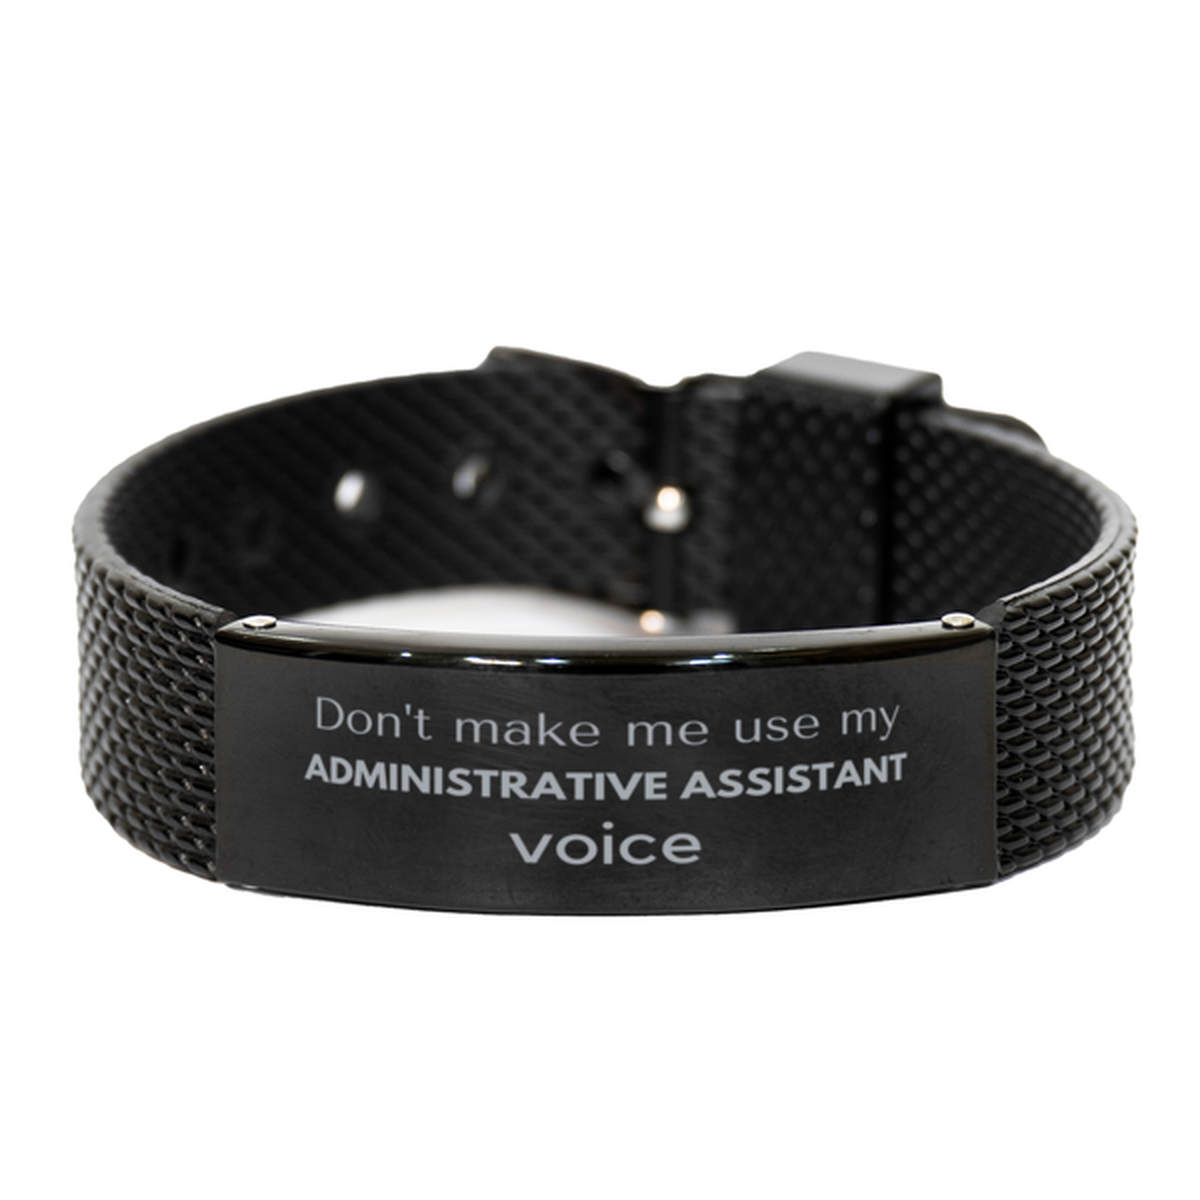 Don't make me use my Administrative Assistant voice, Sarcasm Administrative Assistant Gifts, Christmas Administrative Assistant Black Shark Mesh Bracelet Birthday Unique Gifts For Administrative Assistant Coworkers, Men, Women, Colleague, Friends